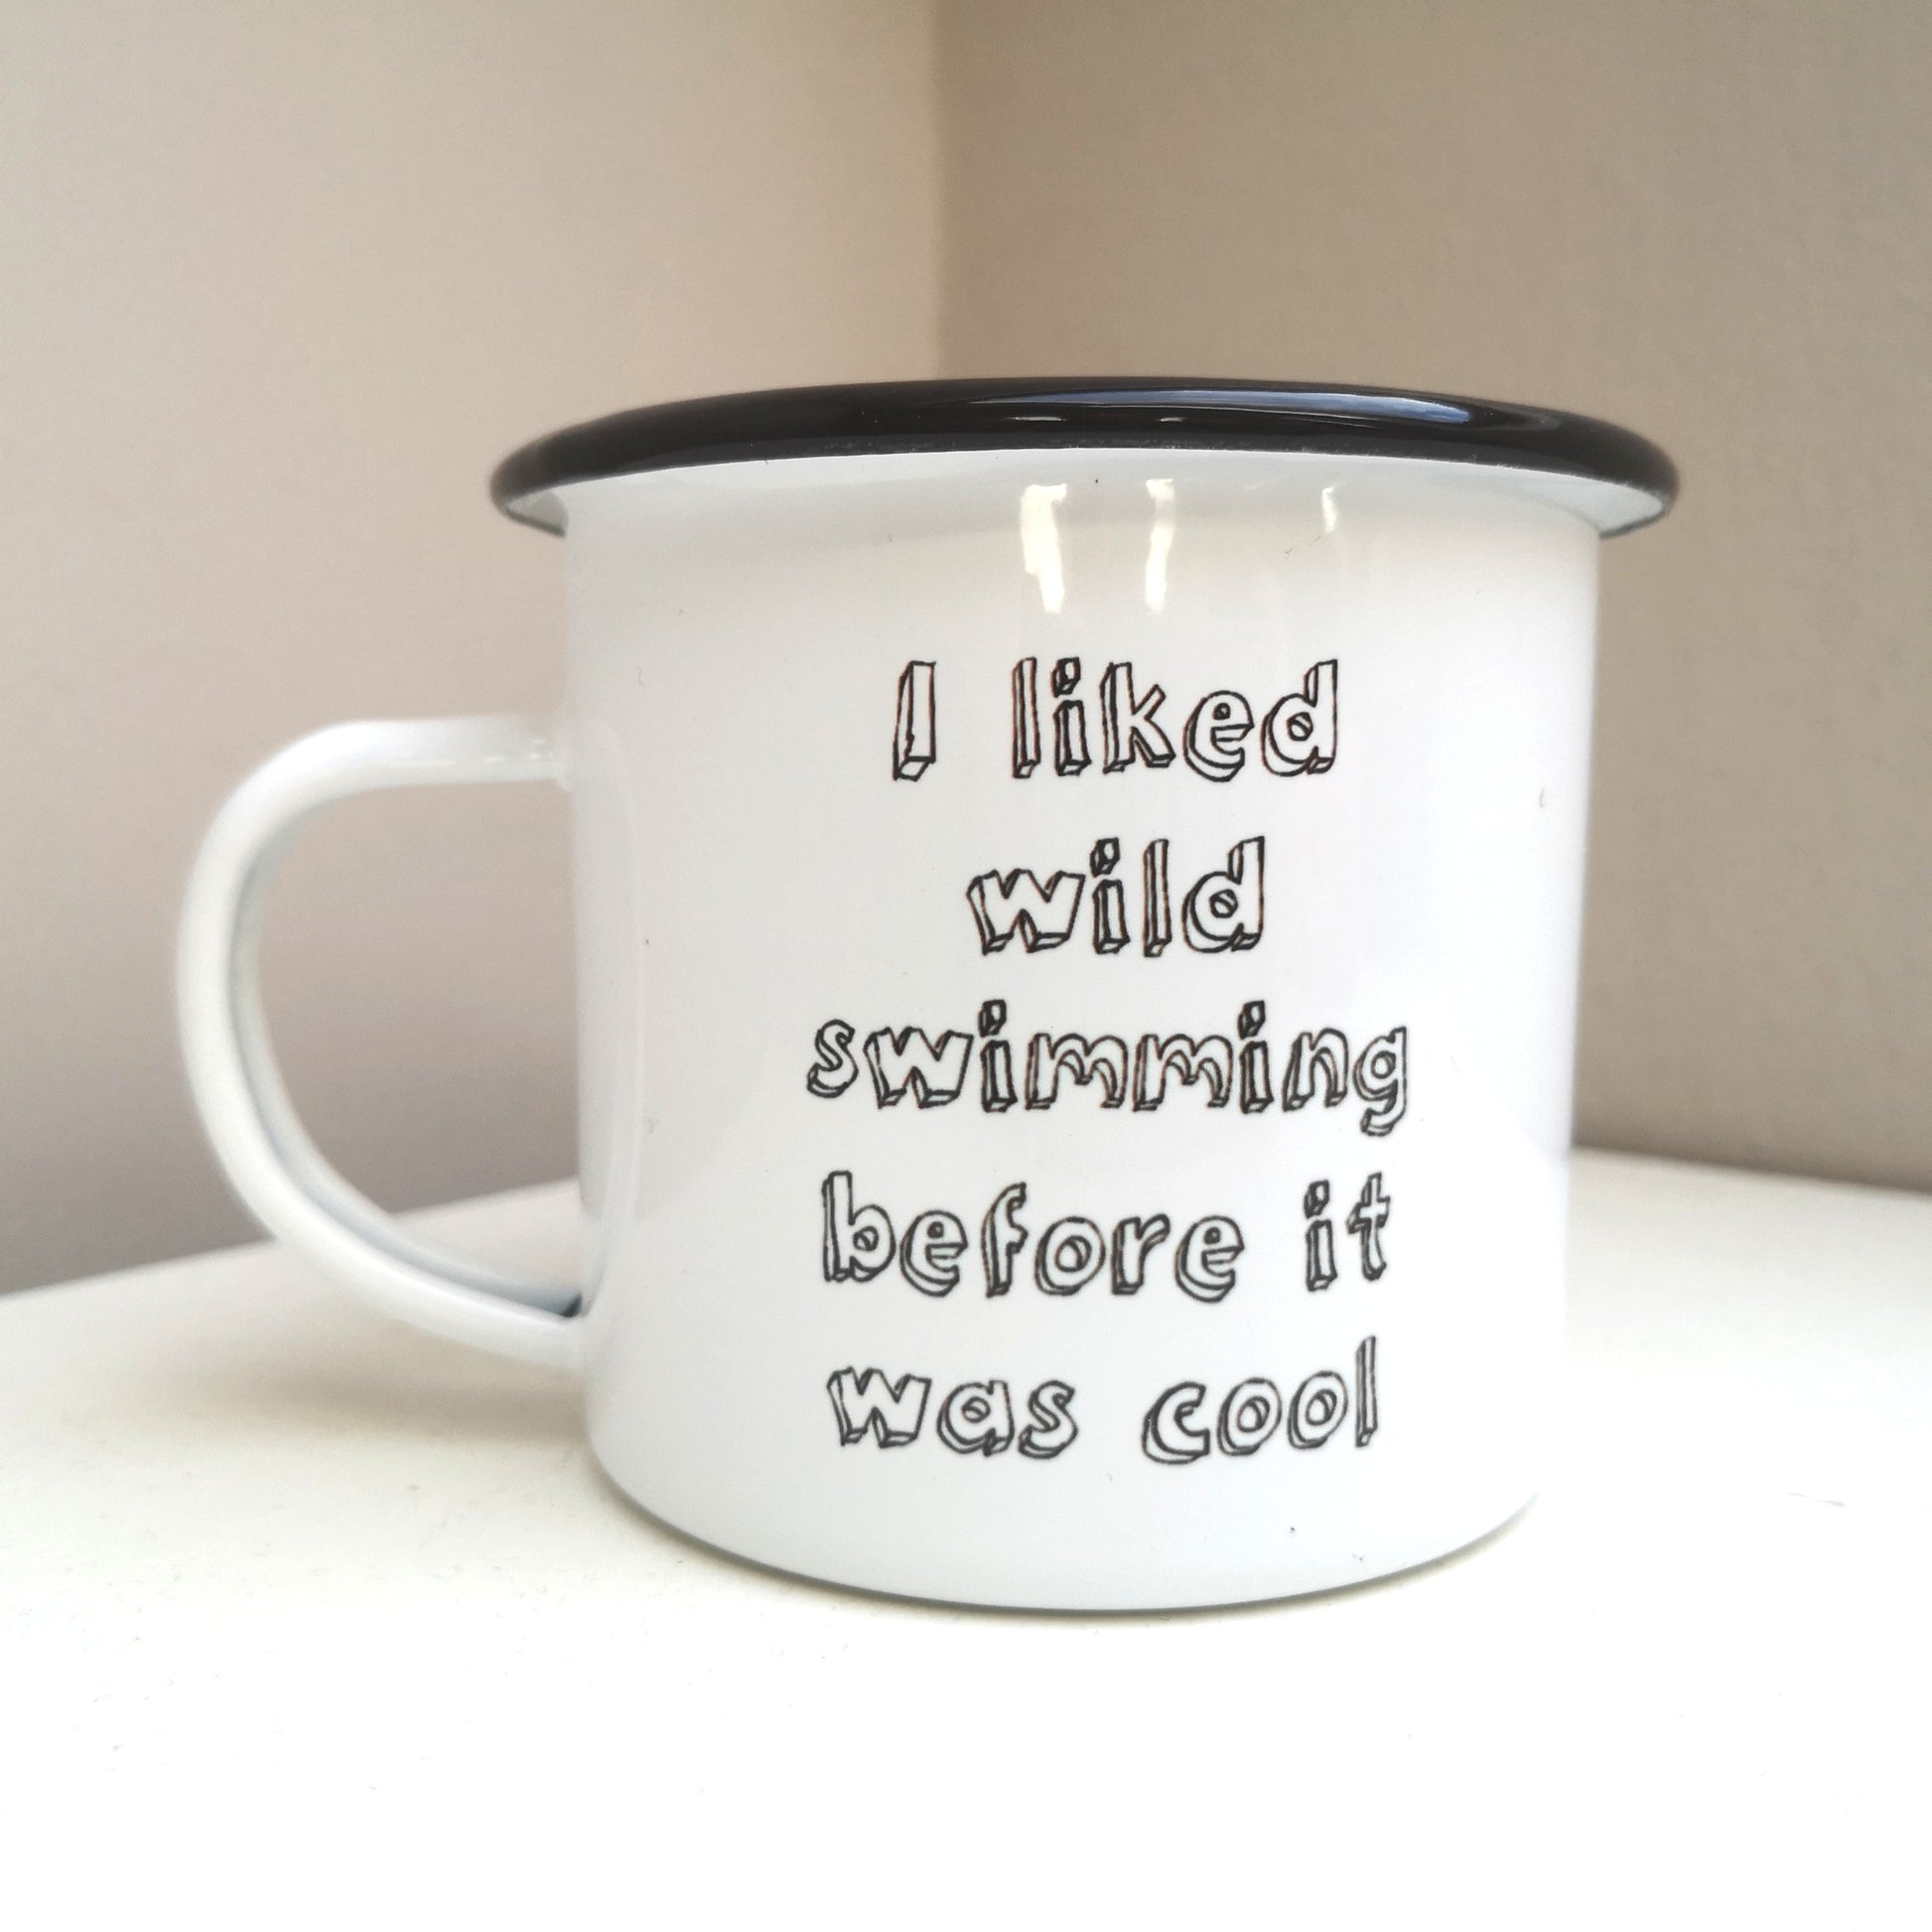 A white steel enamel mug with a black rim, with the following text in black 3d writing - I LIKED WILD SWIMMING BEFORE IT WAS COOL